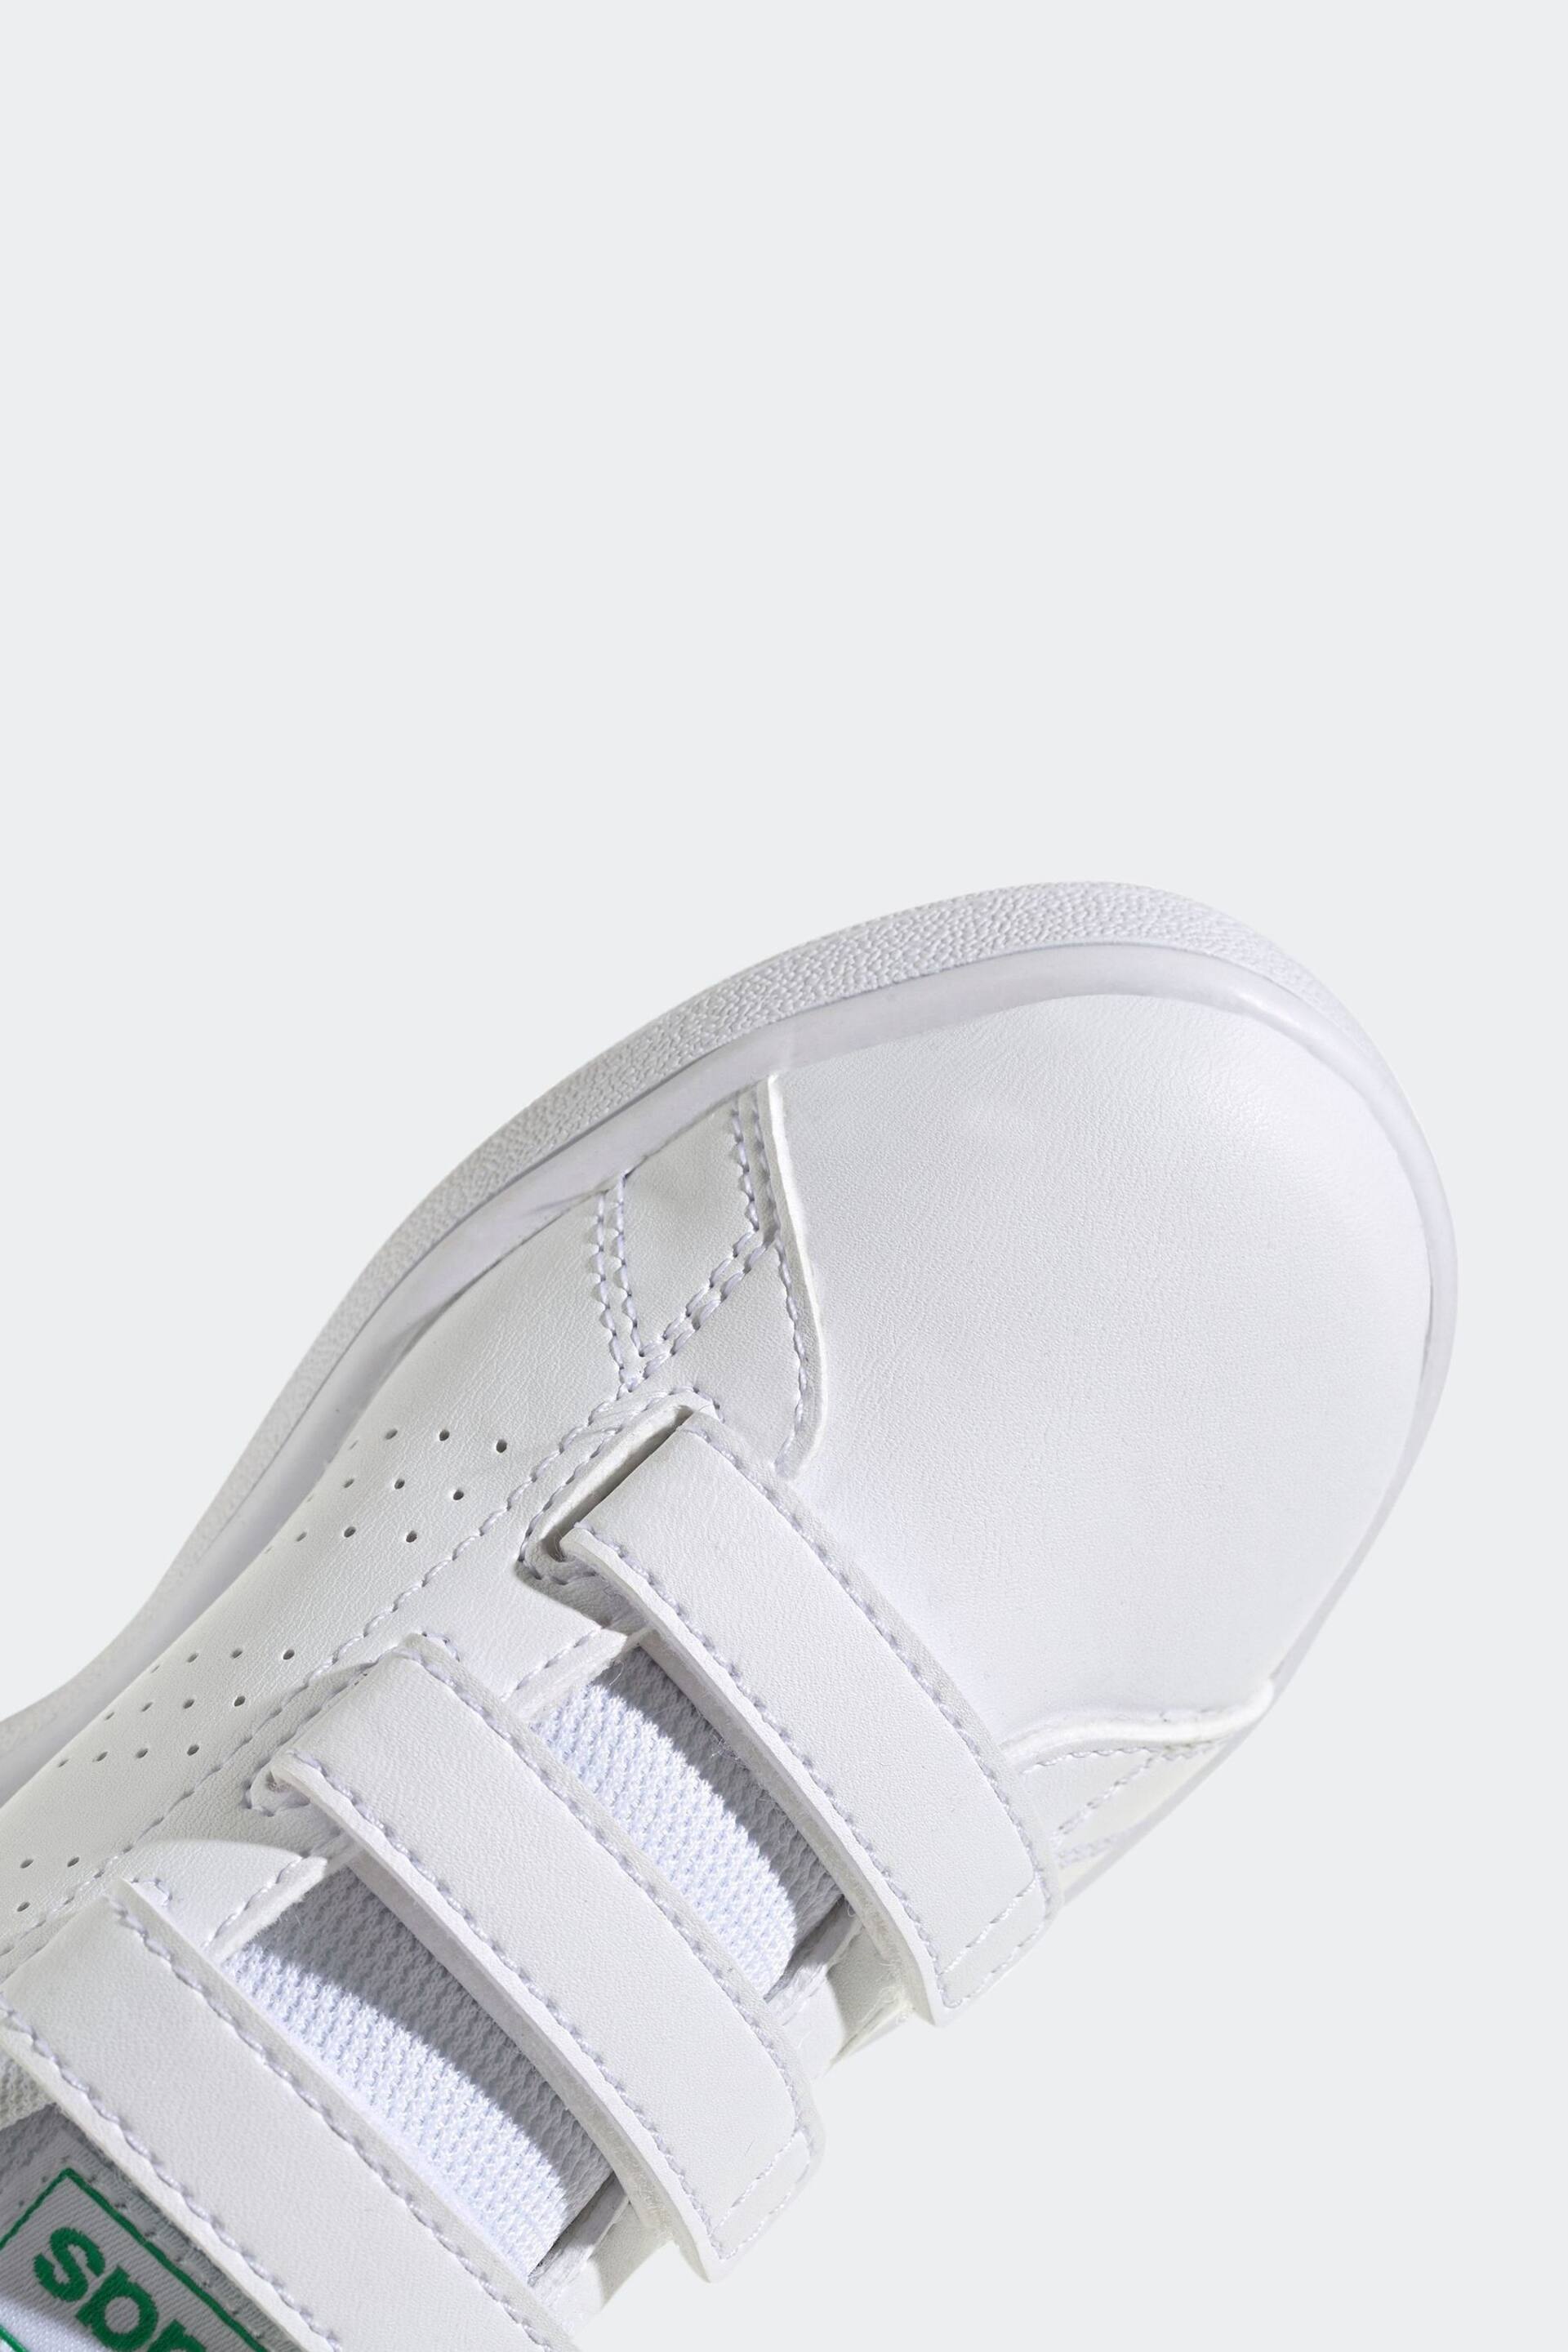 adidas Green/White Sportswear Advantage Court Lifestyle Hook And Loop Trainers - Image 9 of 9